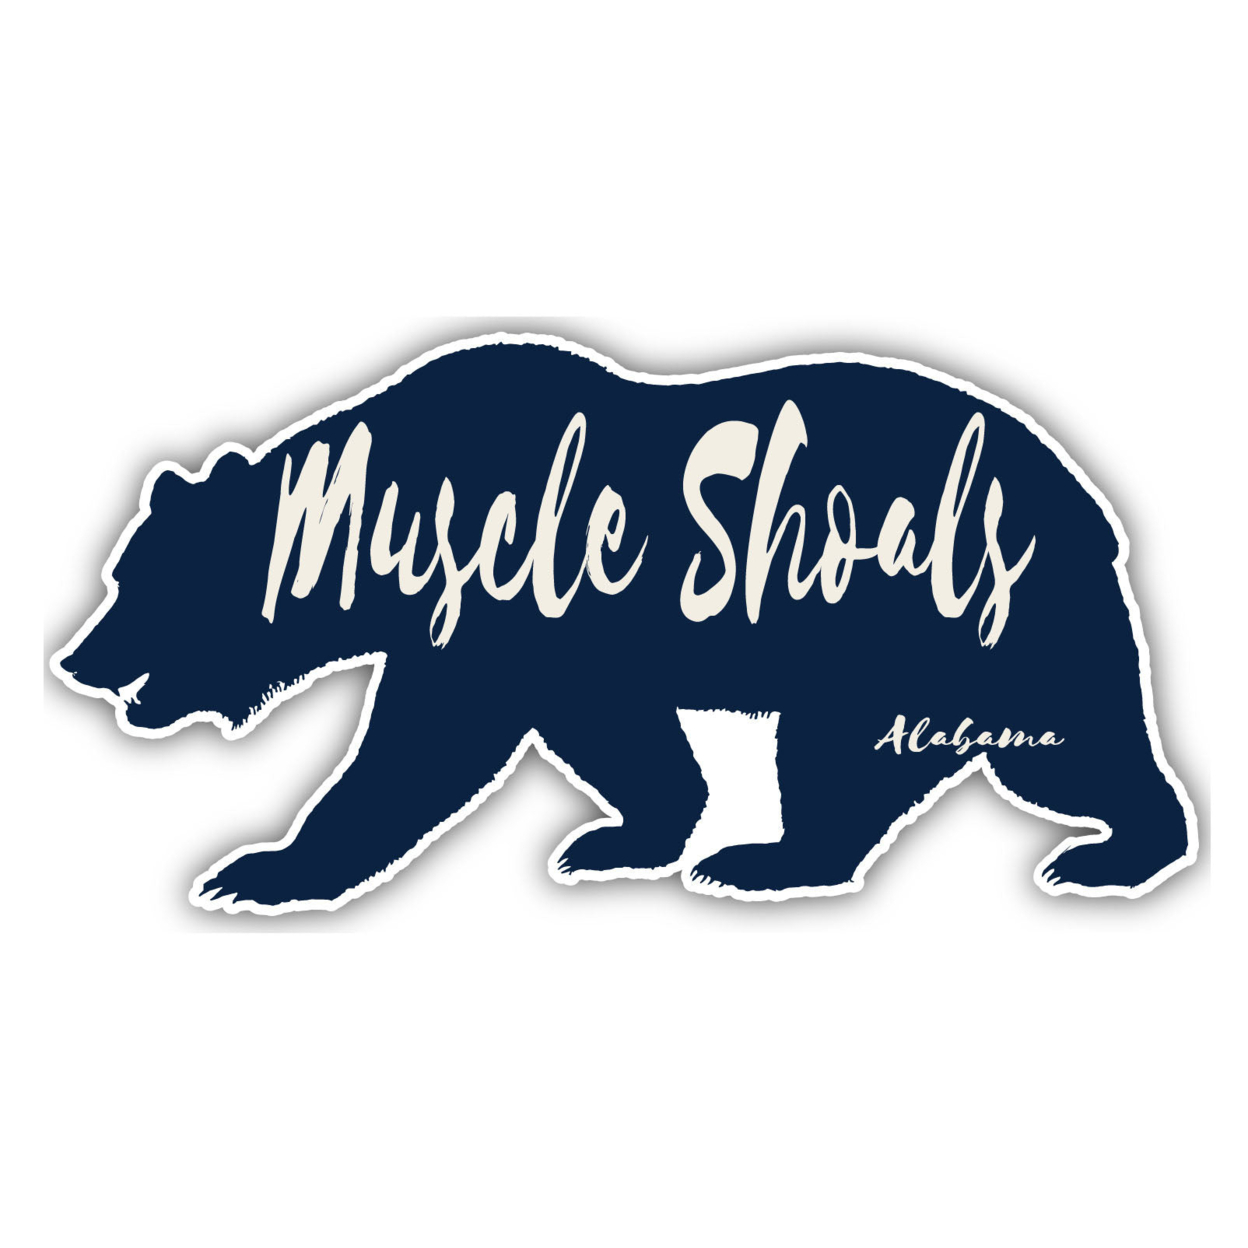 Muscle Shoals Alabama Souvenir Decorative Stickers (Choose Theme And Size) - Single Unit, 4-Inch, Great Outdoors